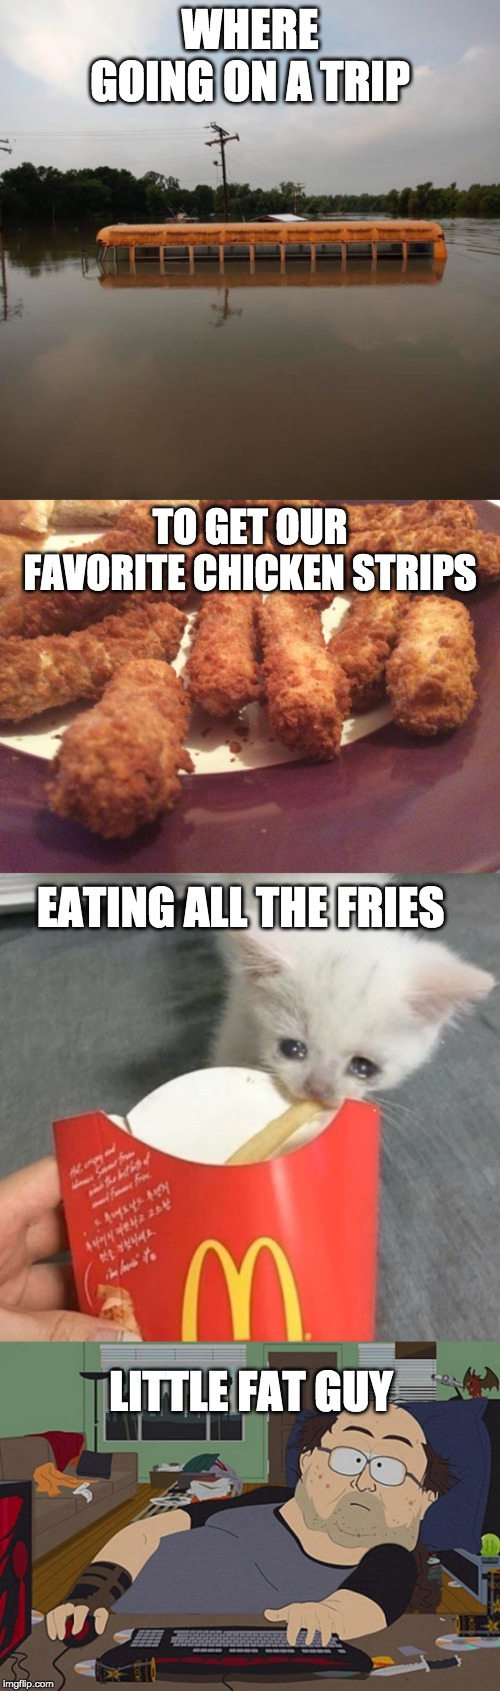 WHERE GOING ON A TRIP; TO GET OUR FAVORITE CHICKEN STRIPS; EATING ALL THE FRIES; LITTLE FAT GUY | image tagged in flooded school bus,chicken strips,fat guy south park computer,sad kitten eats fries | made w/ Imgflip meme maker